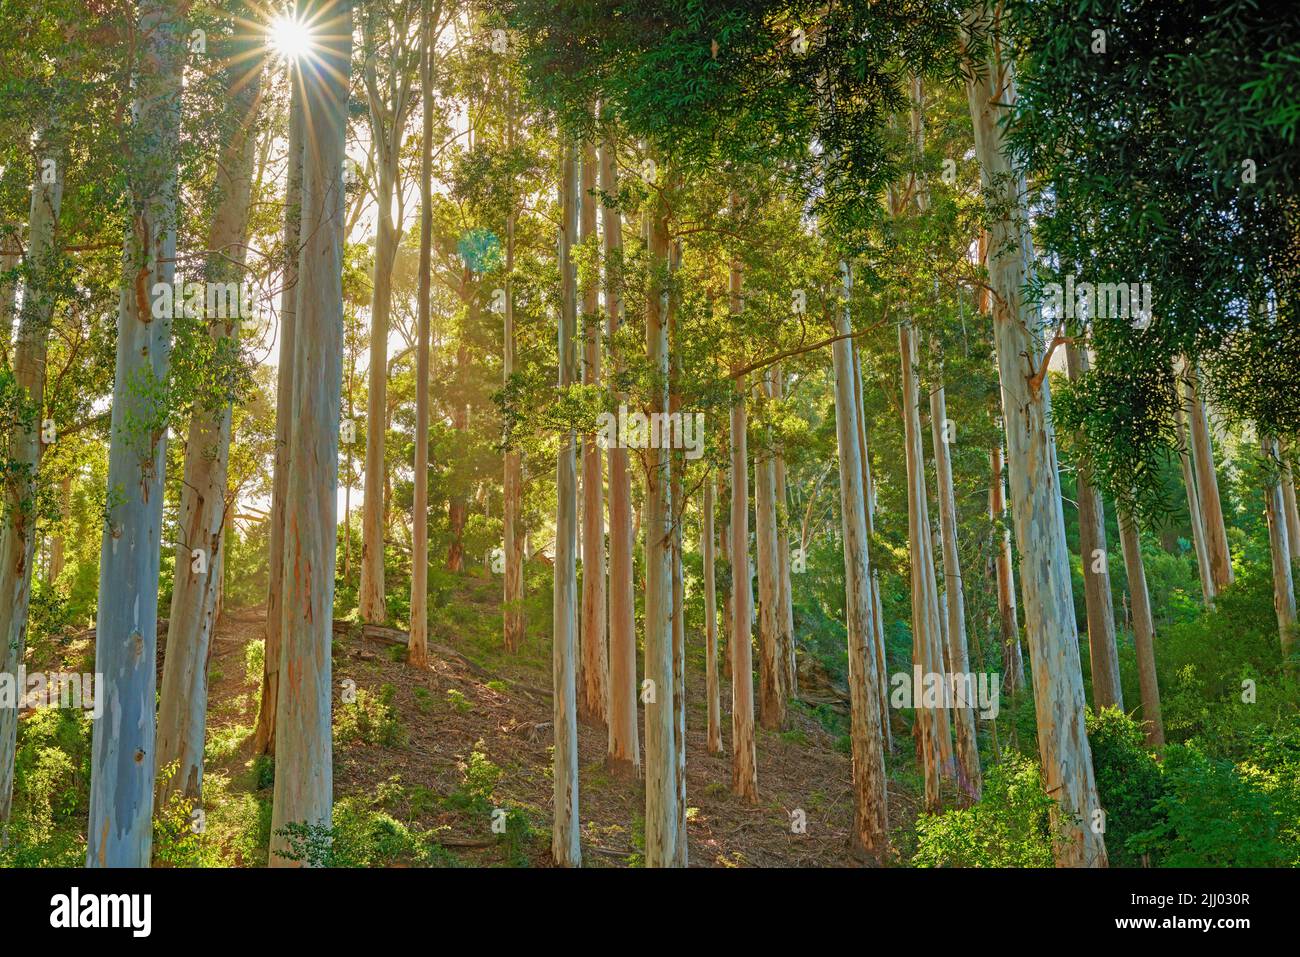 Wild trees growing in a forest with lush plants and lens flare. Scenic landscape of tall wooden trunks and blooming green leaves on a sunny day Stock Photo